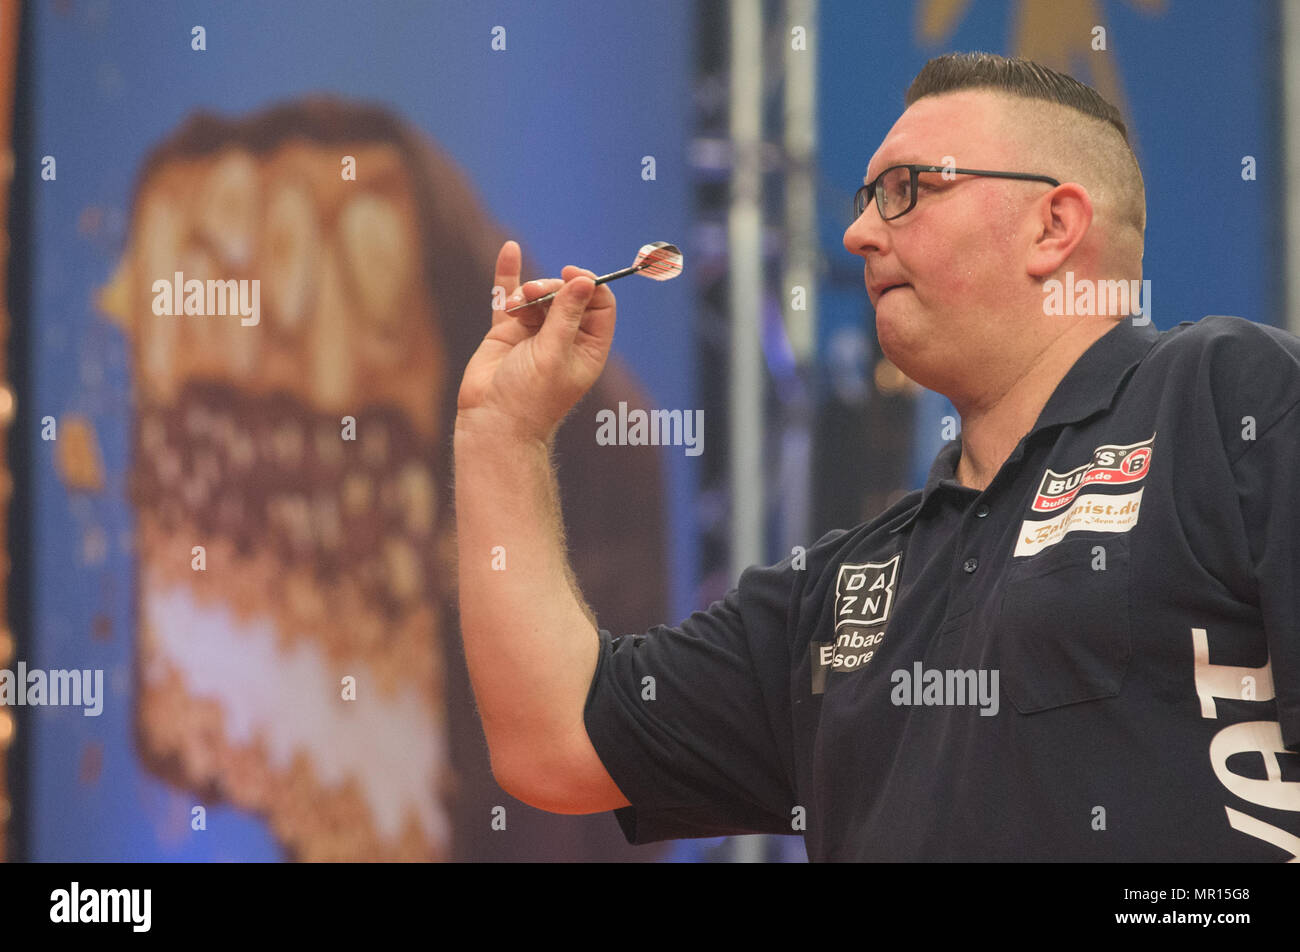 25 May 2018, Germany, Gelsenkirchen Dragutin Horvat of Germany in action during the German Darts Masters in the PDC World Series of Darts